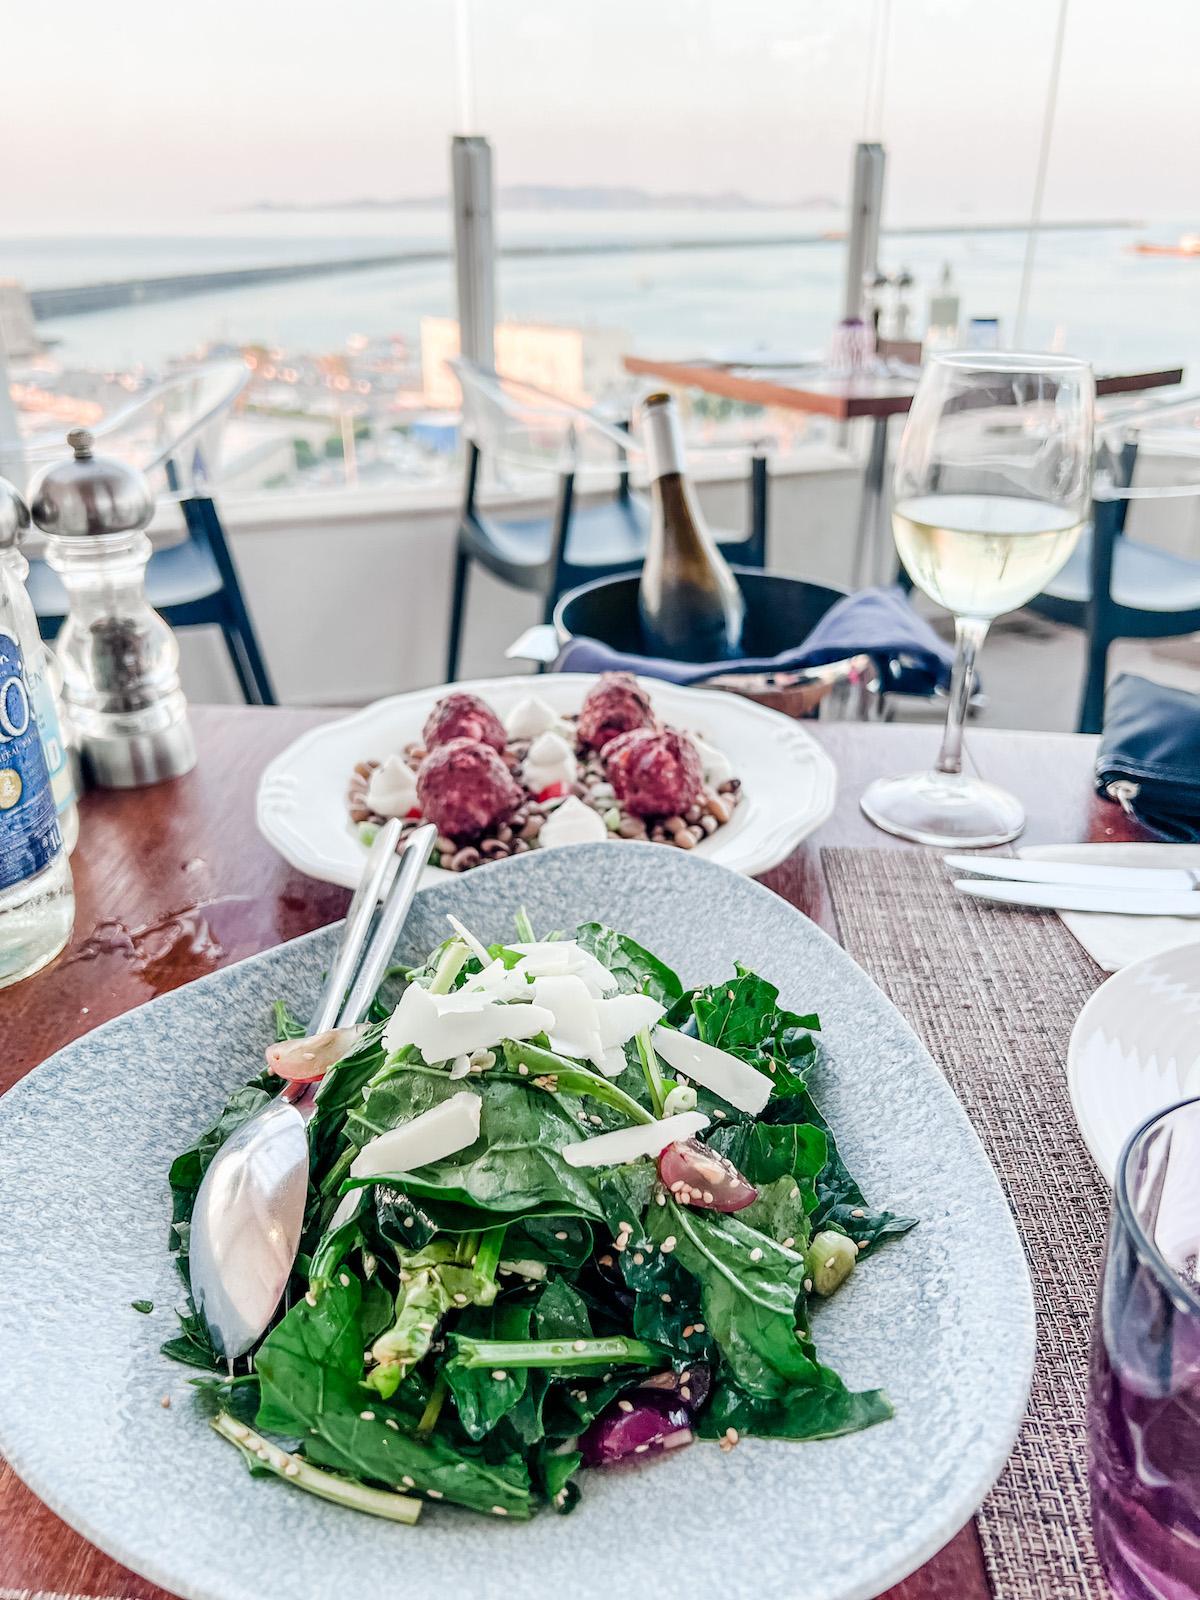 Lato Boutique restaurant food with view